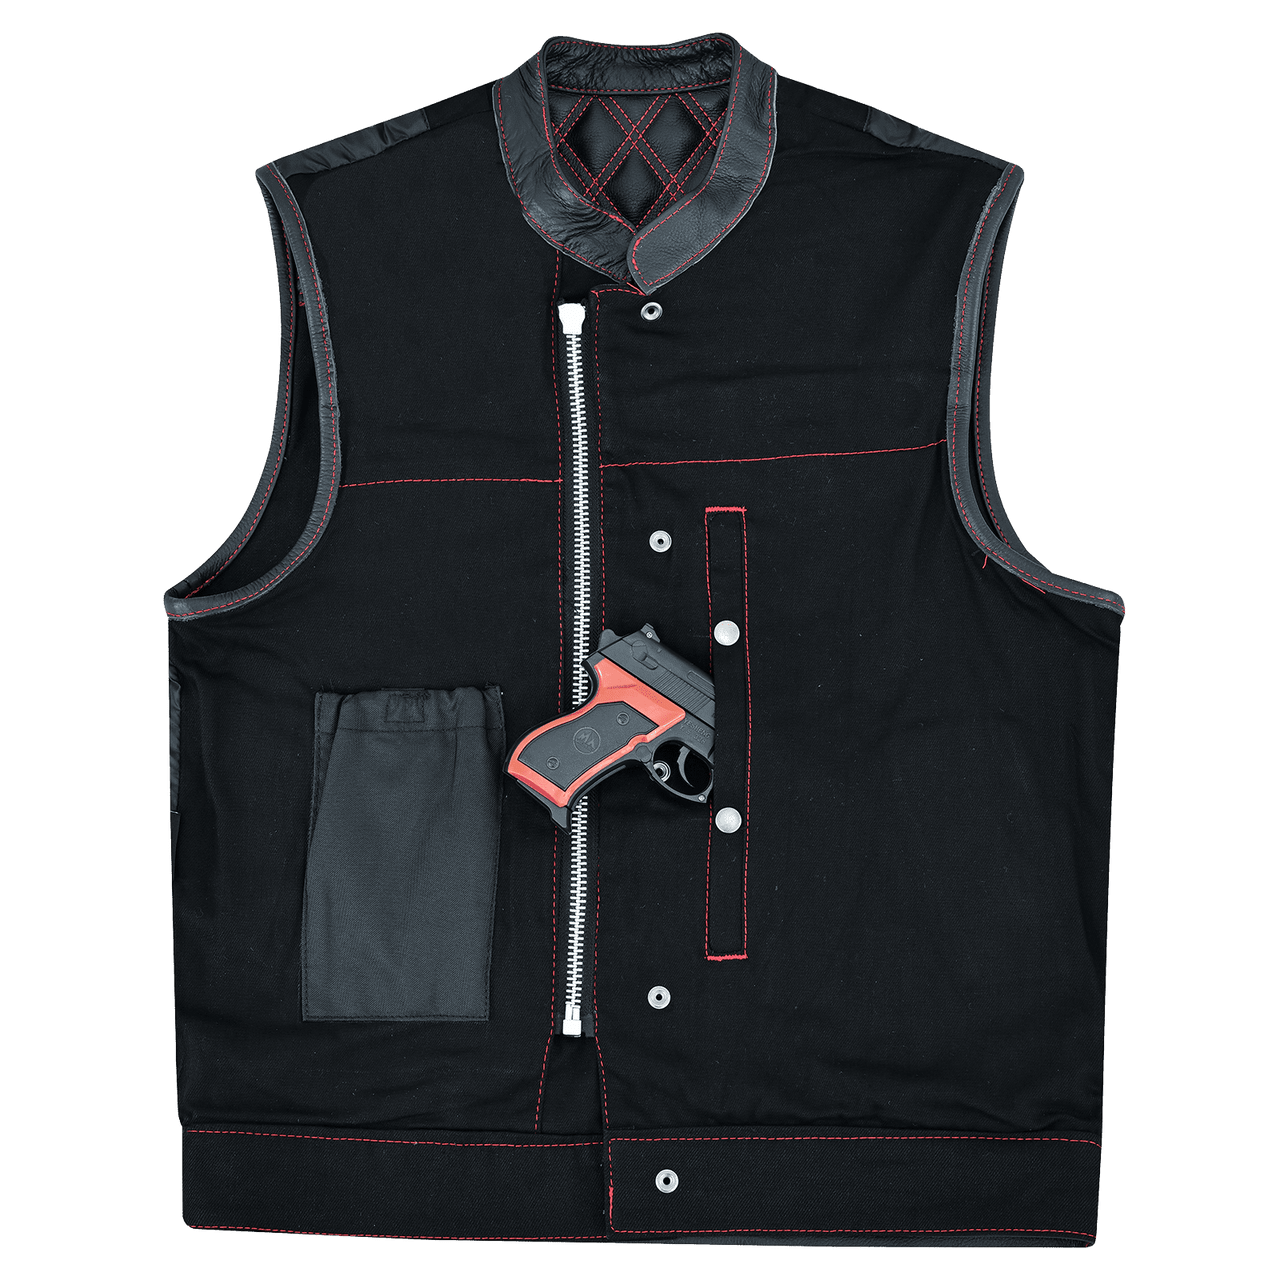 Vance-Leathers-VB924RD-Men's-Denim-Leather-Motorcycle-Vest-with-Red-Stitching-conceal carry pocket